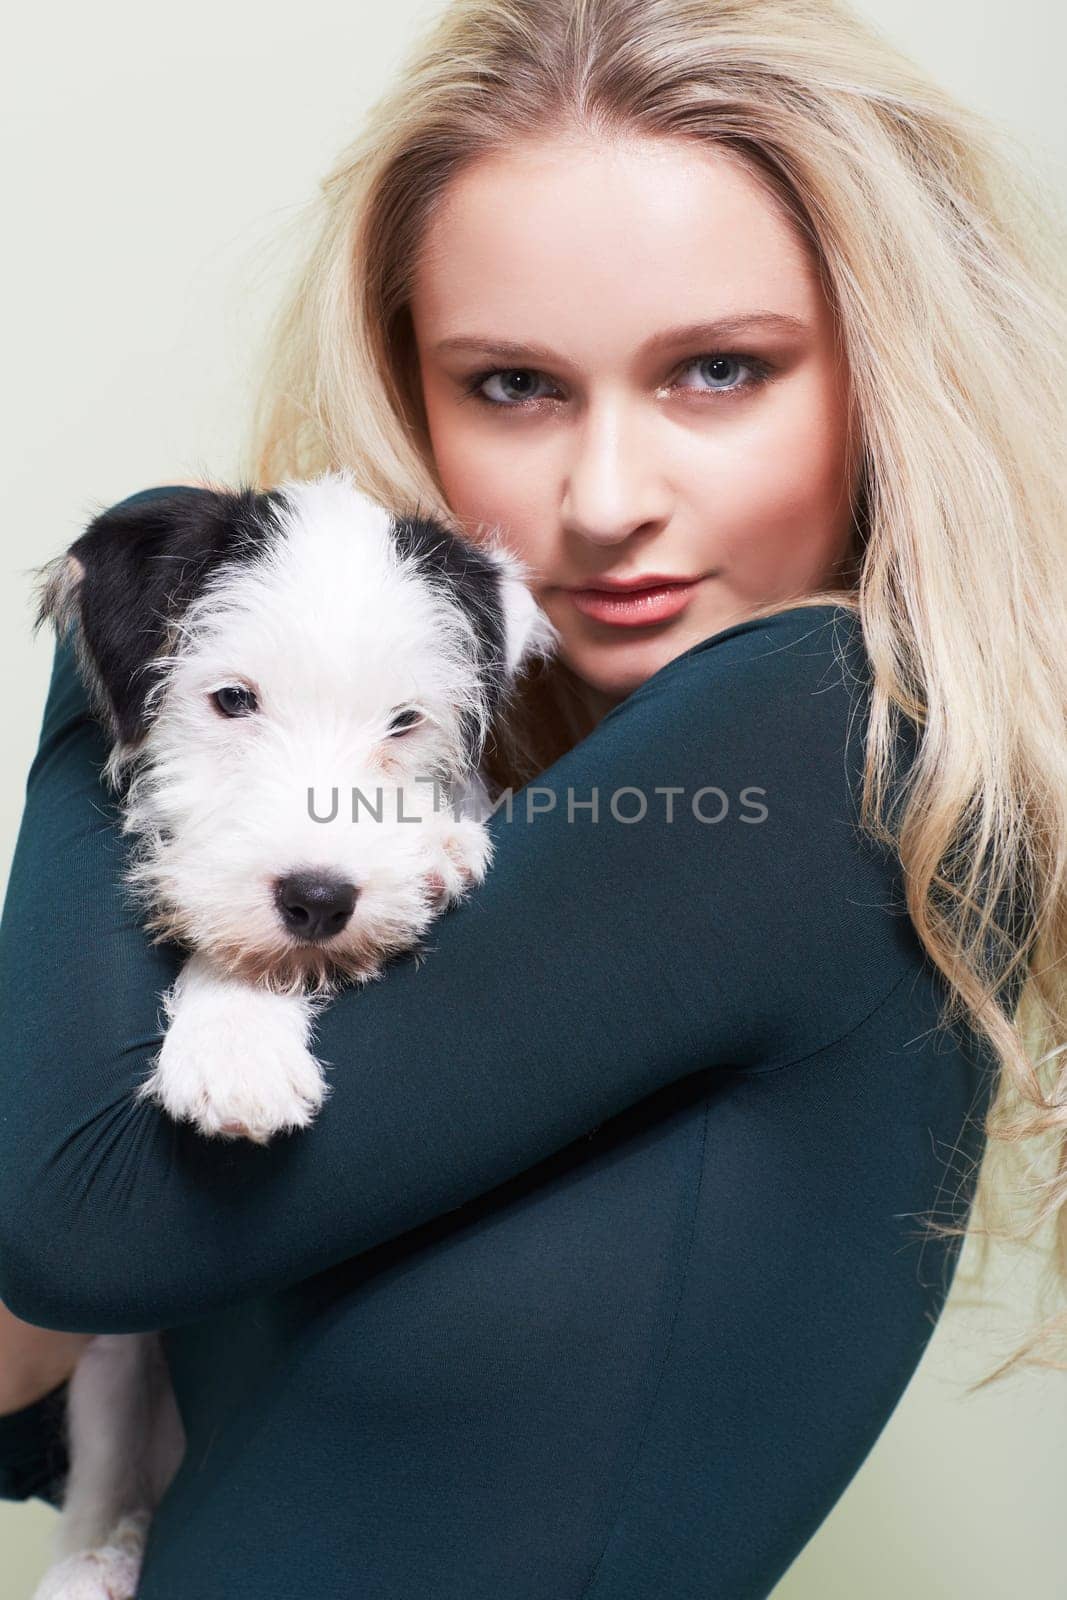 Portrait, hug and woman with a dog in her home with love, care and bonding, trust and chilling together. Puppy, love and face of female person embracing Jackapoo pet in house with support or security by YuriArcurs